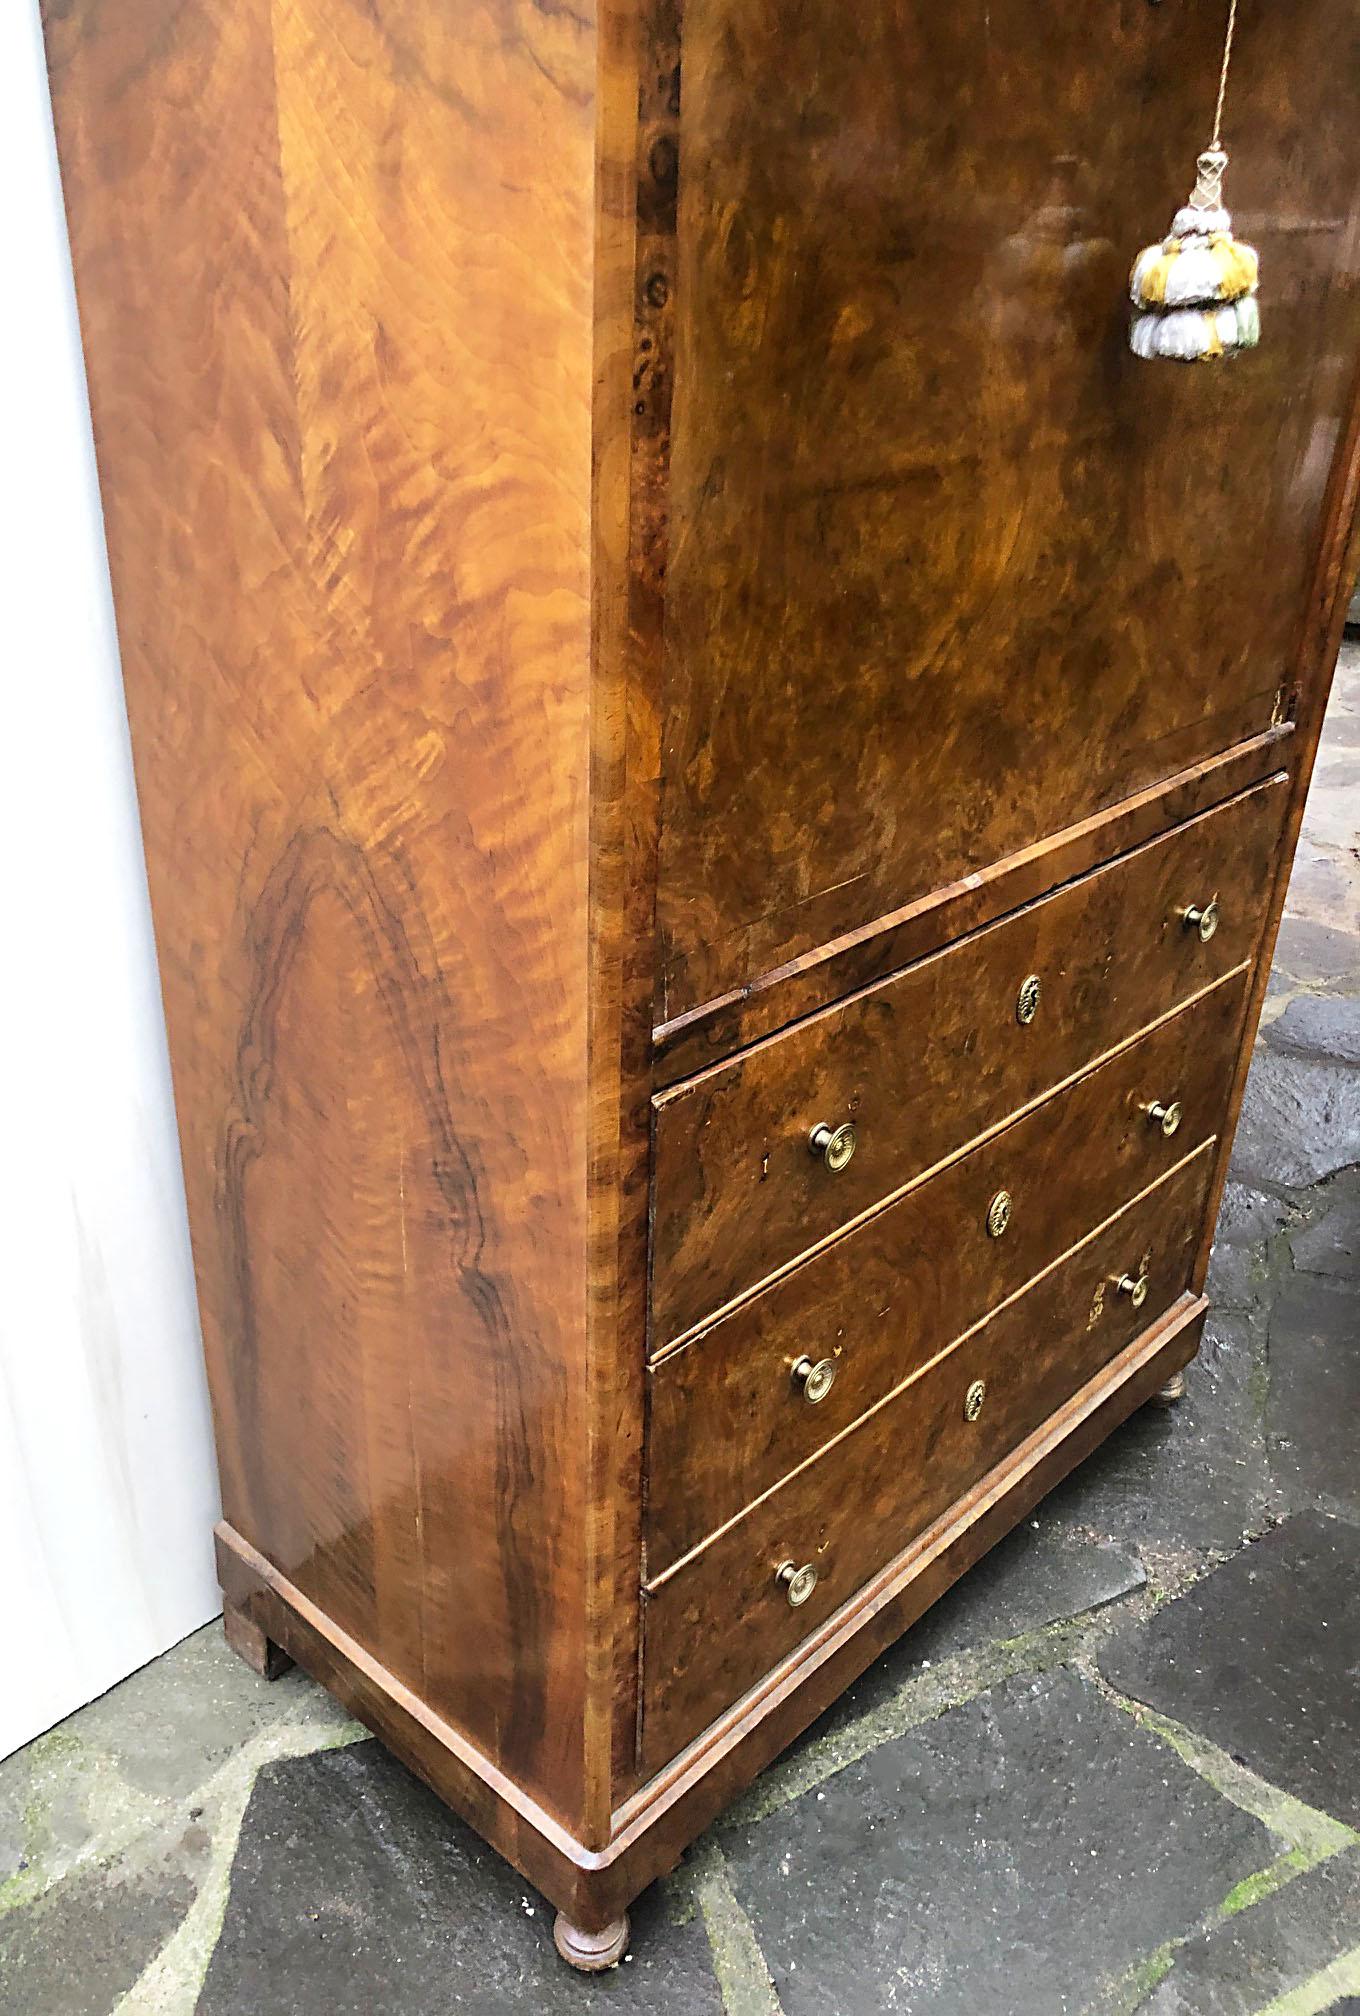 Original Italian secretaire from 1880, in walnut and briar veneer.
Inside it has many drawers.
It has signs of wear and is very heavy.
Comes from an old city house in the Florence area of Tuscany.
The paint is original in patina, honey amber color.